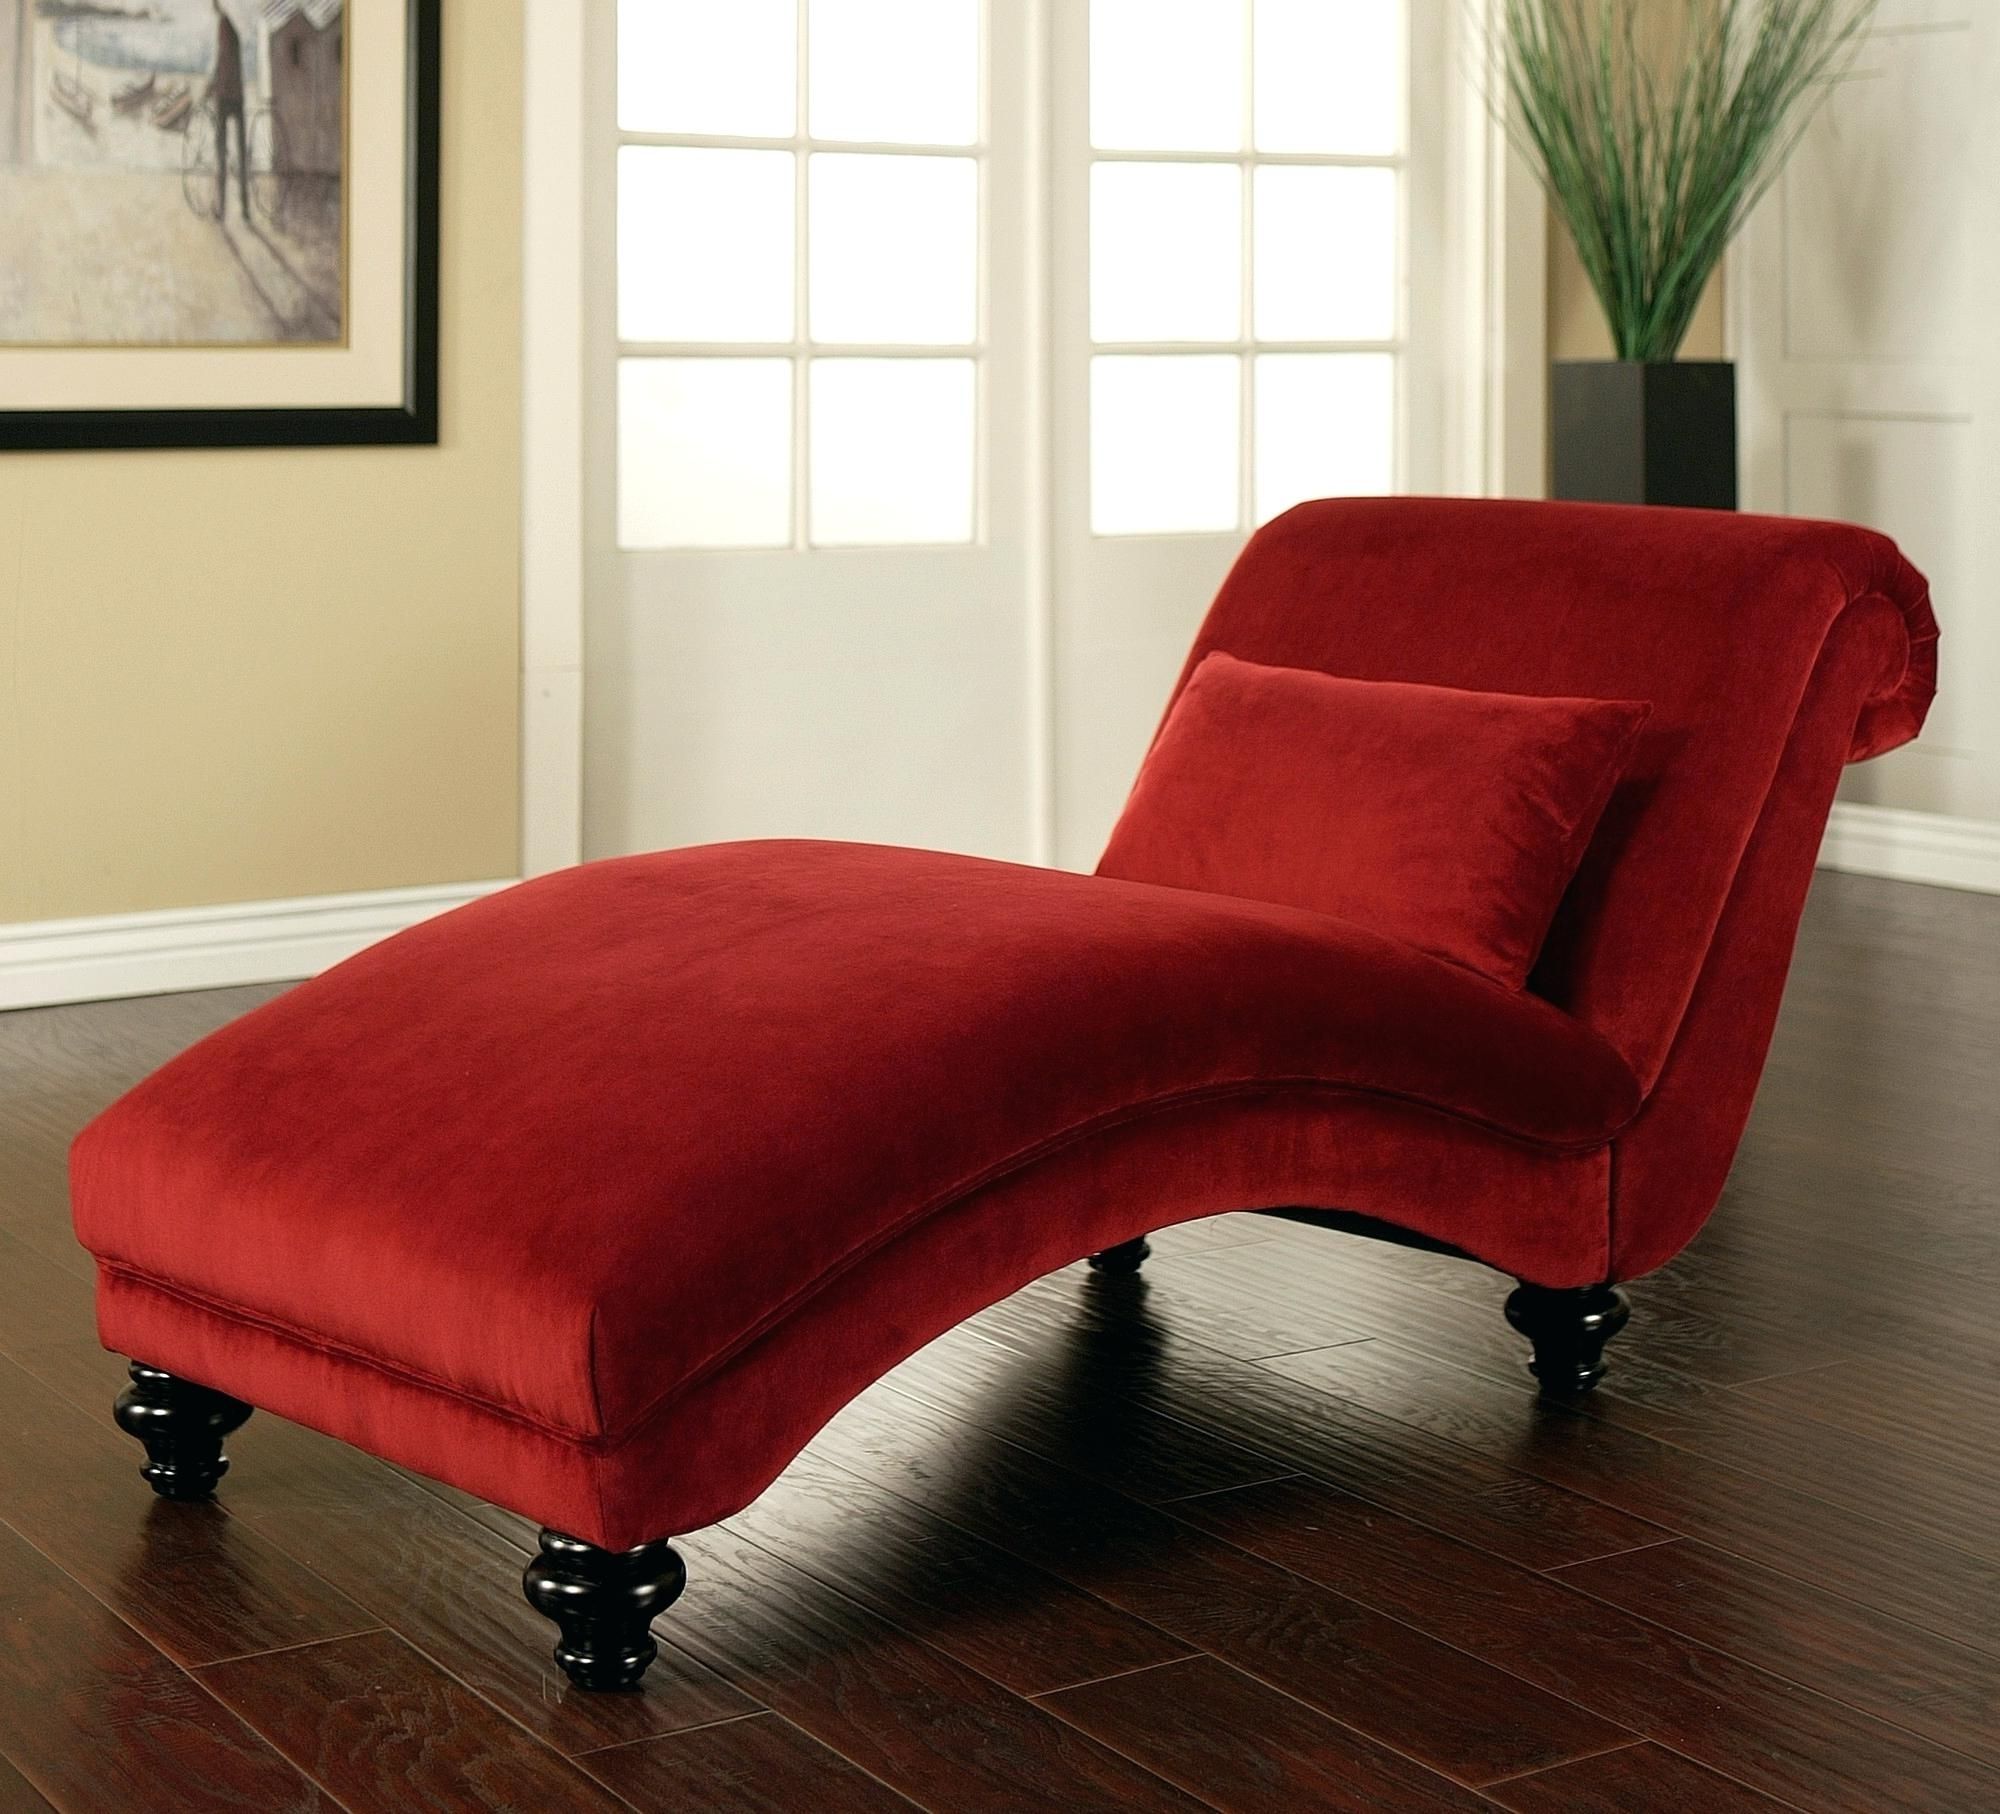 Curved Chaise Lounges Intended For 2017 Best Ideas Of Chaise Lounge Red On Chaise Lounges Minimalist (View 4 of 15)